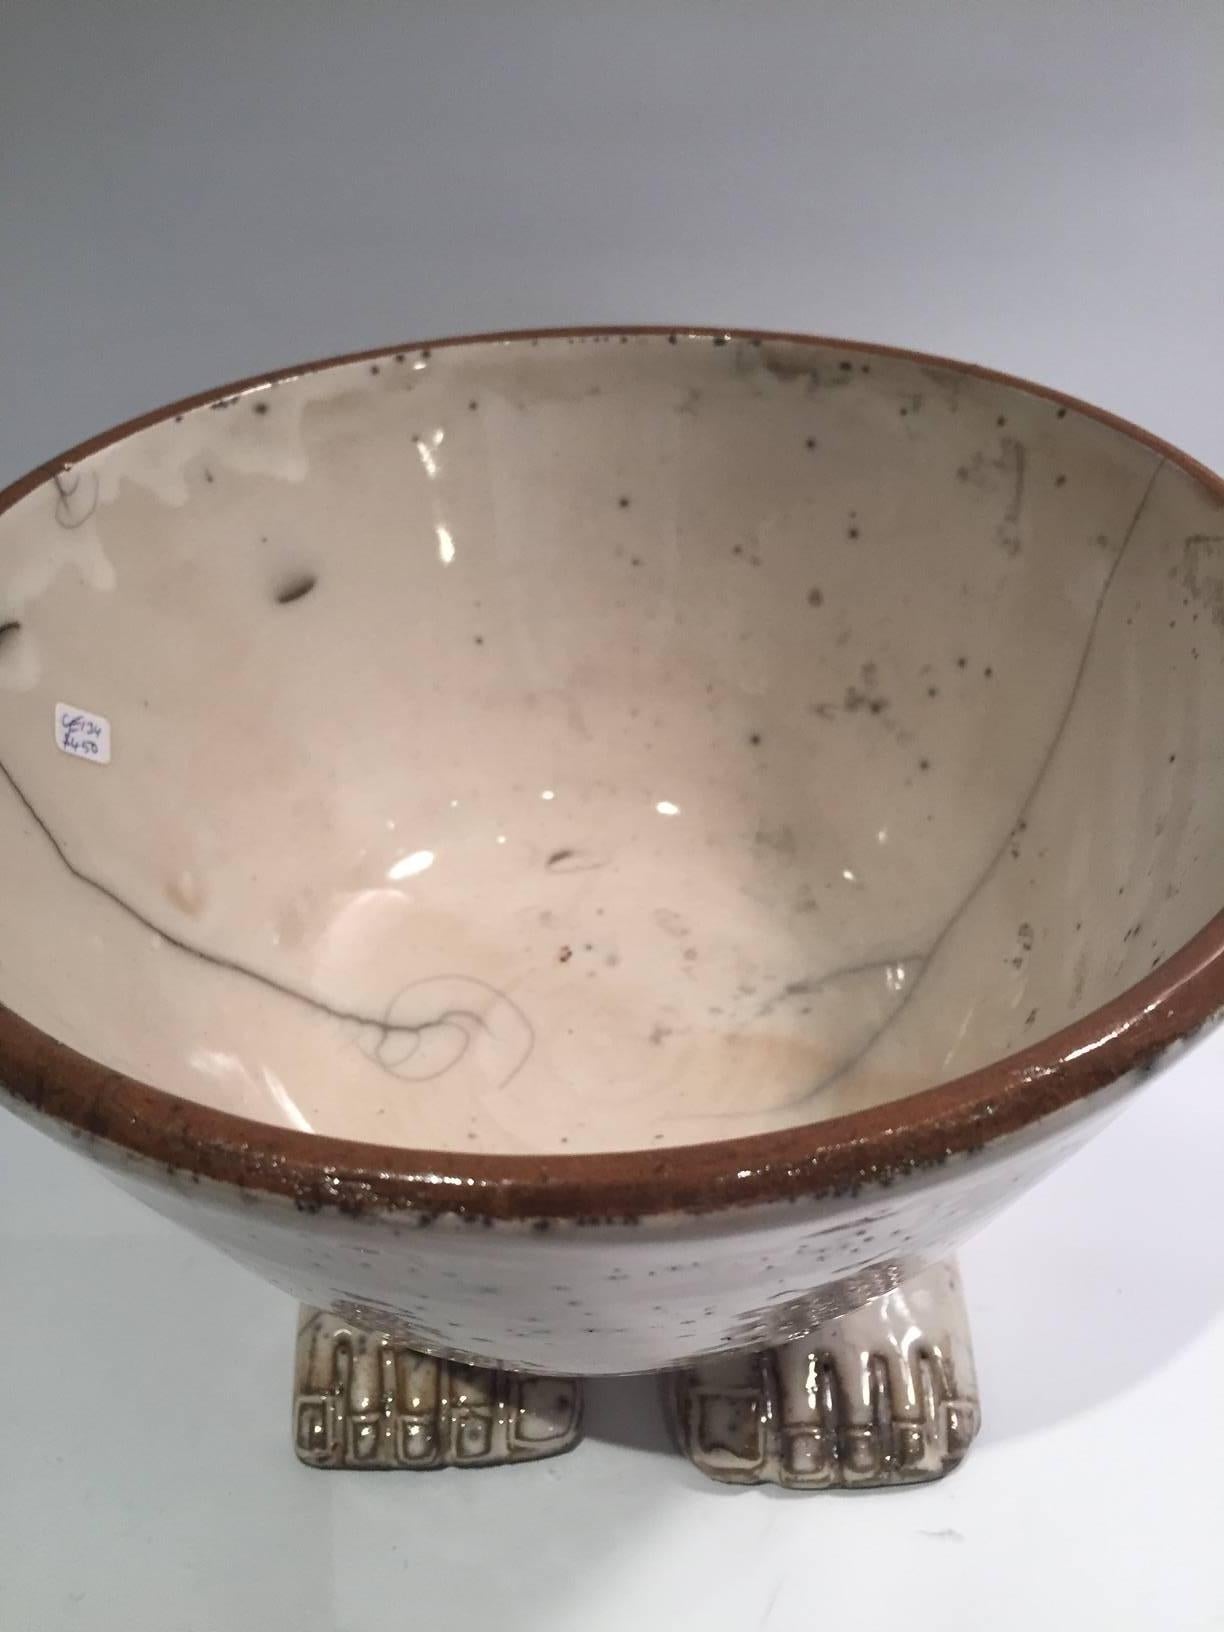 Contemporary Egyptian Footed Glazed Ceramic Libation Bowl from Luxor